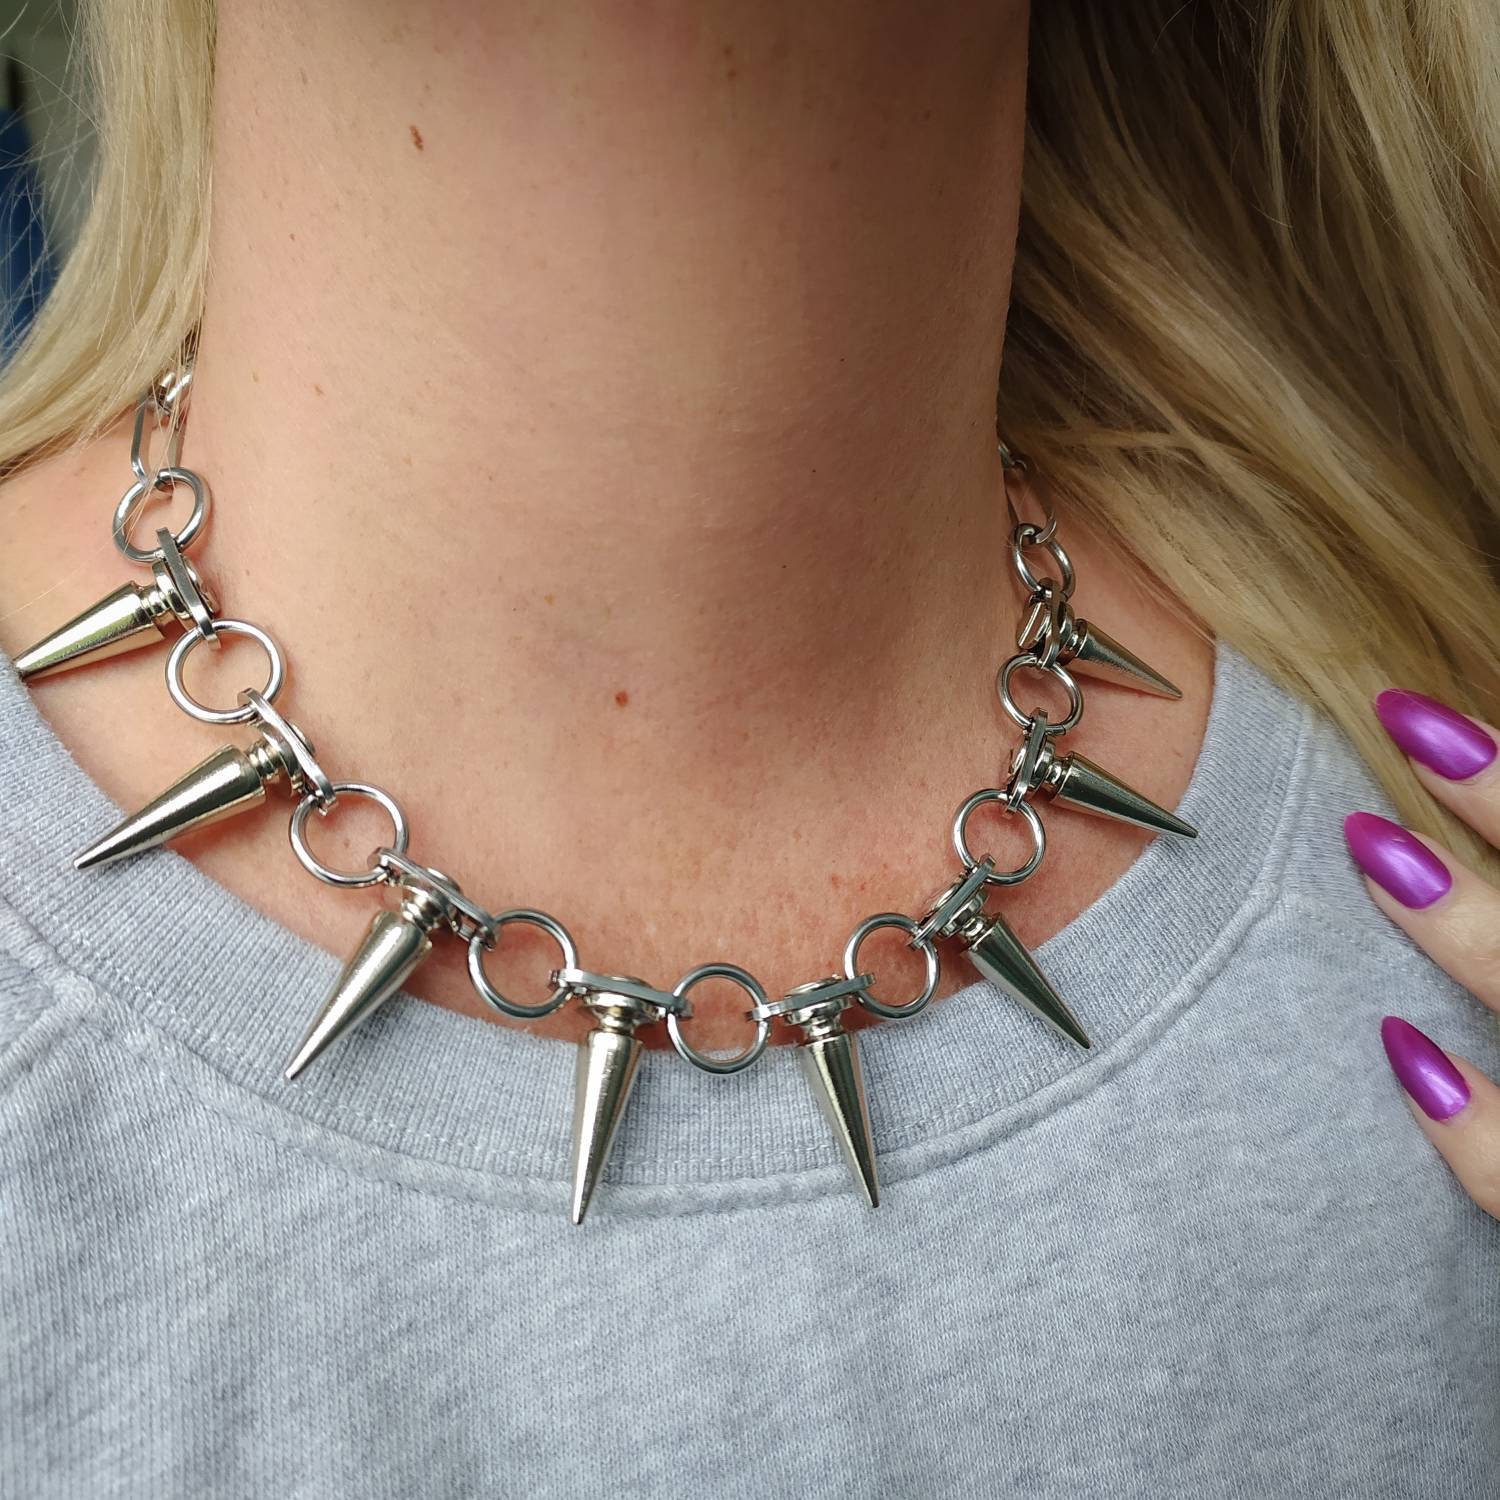 Spike chain choker necklace, gothic jewelry, spike necklace, paperclip  chain, stainless steel, punk necklace, punk jewellery, grunge, emo